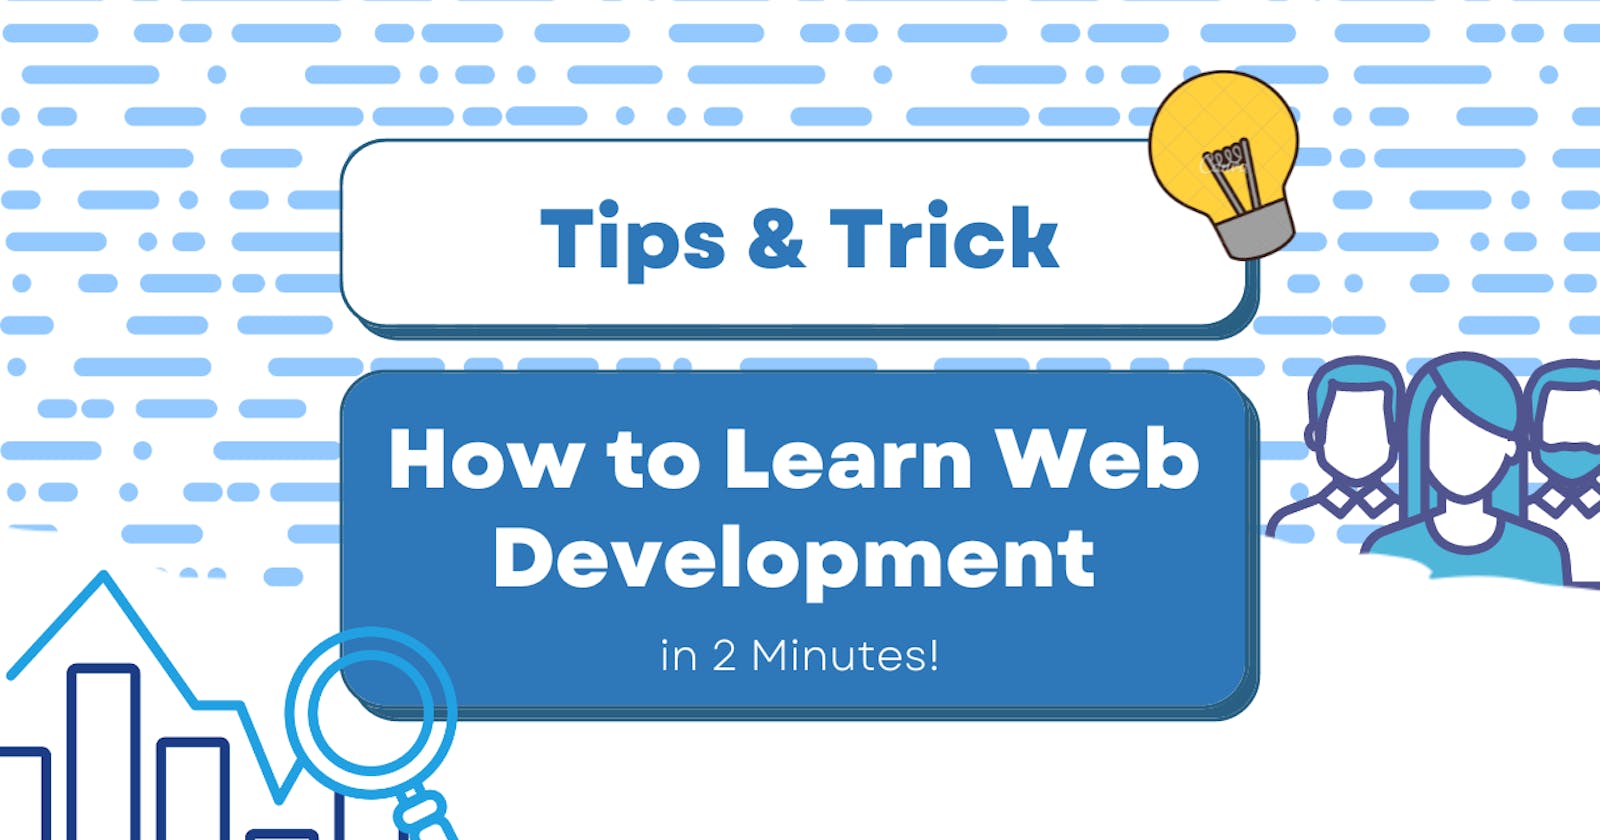 How to Learn Web Development